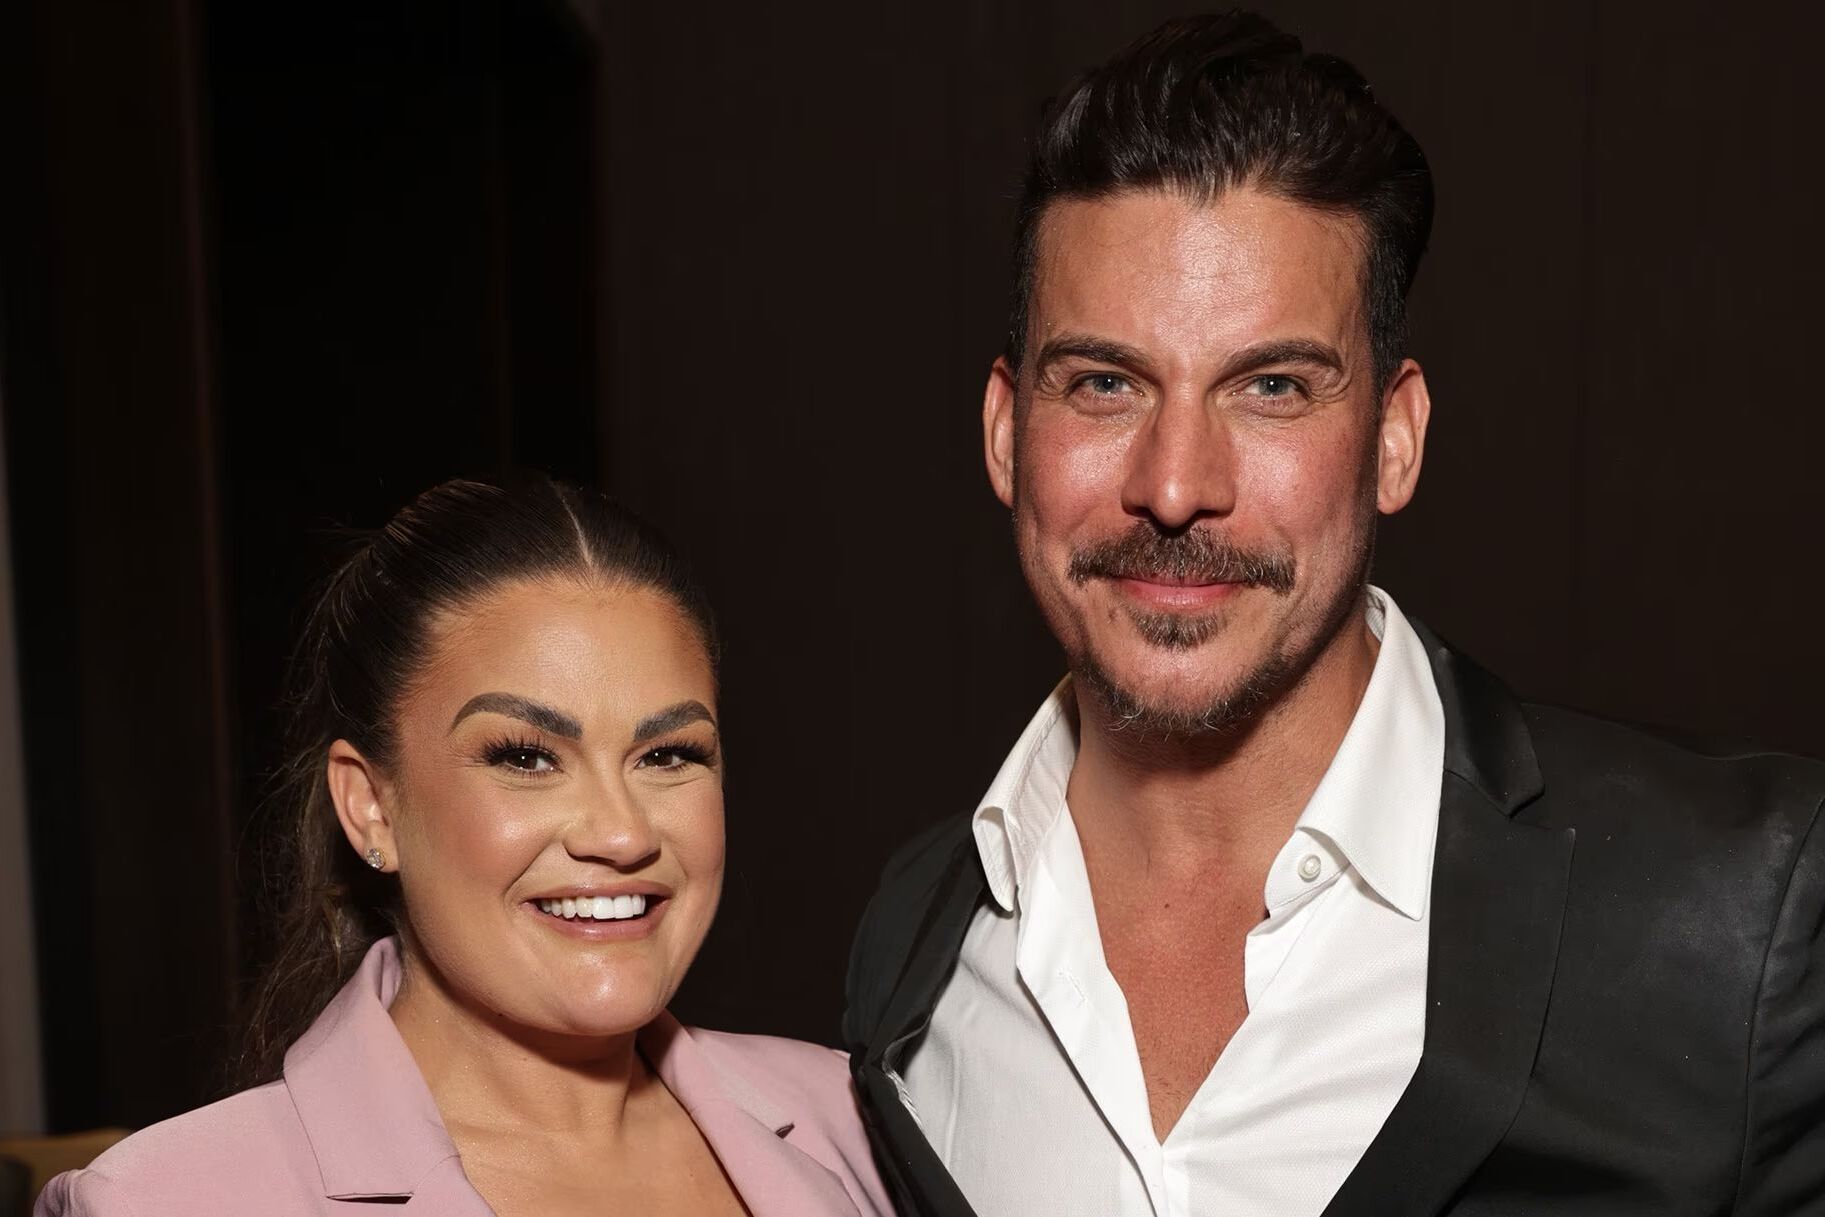 Brittany Cartwright Opens Up About Relationship With Jax Taylor